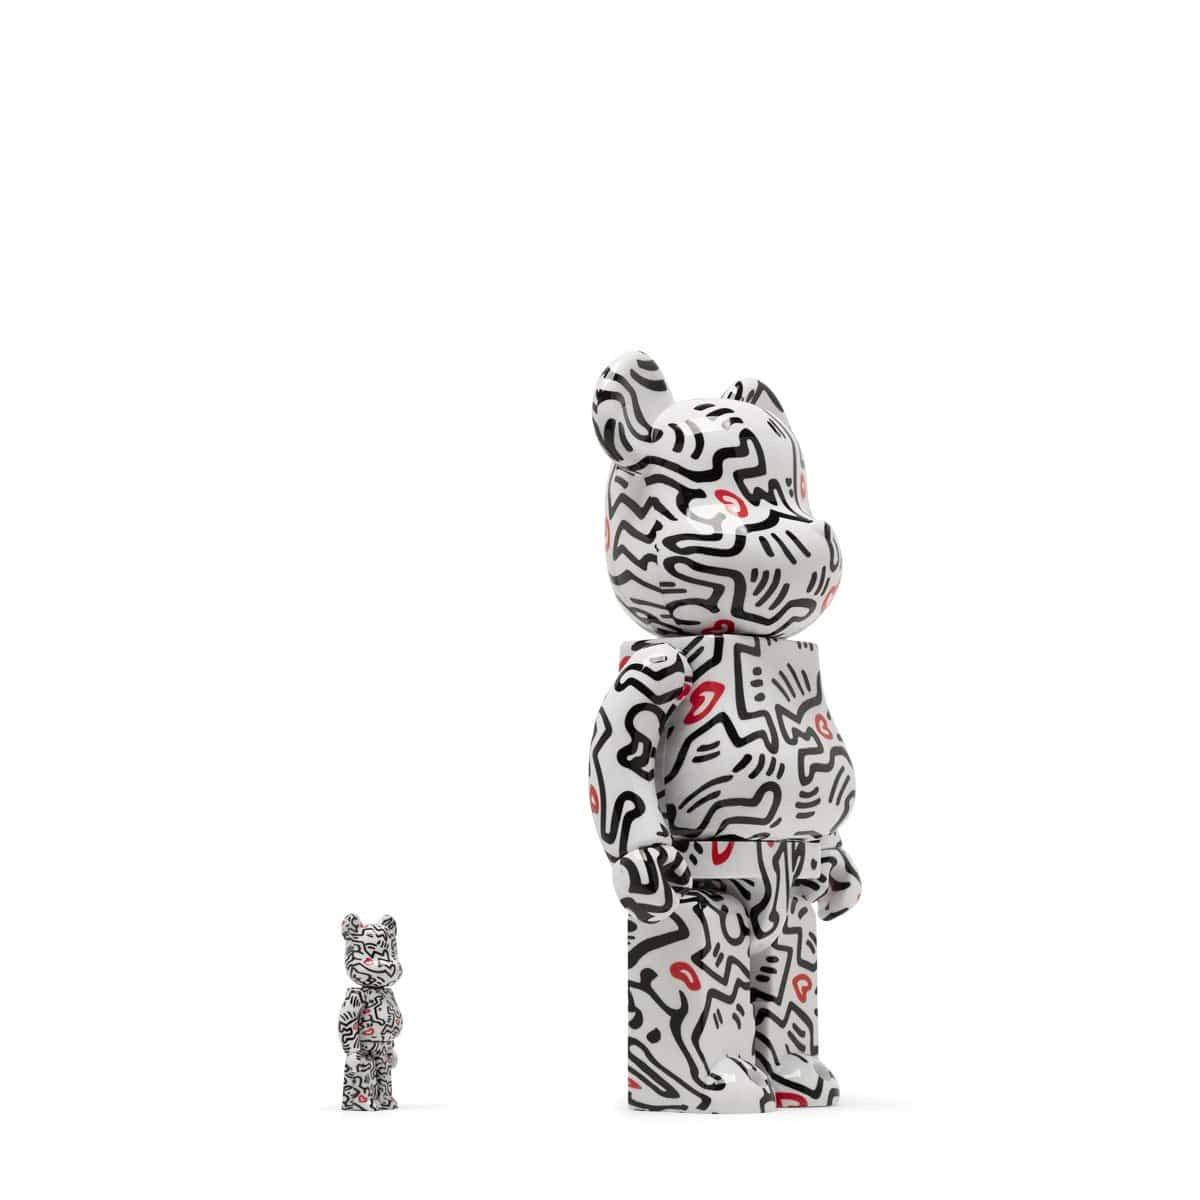 Medicom Toy Odds & Ends MULTI / O/S BE@RBRICK KEITH HARING #8 100% & 400% SET